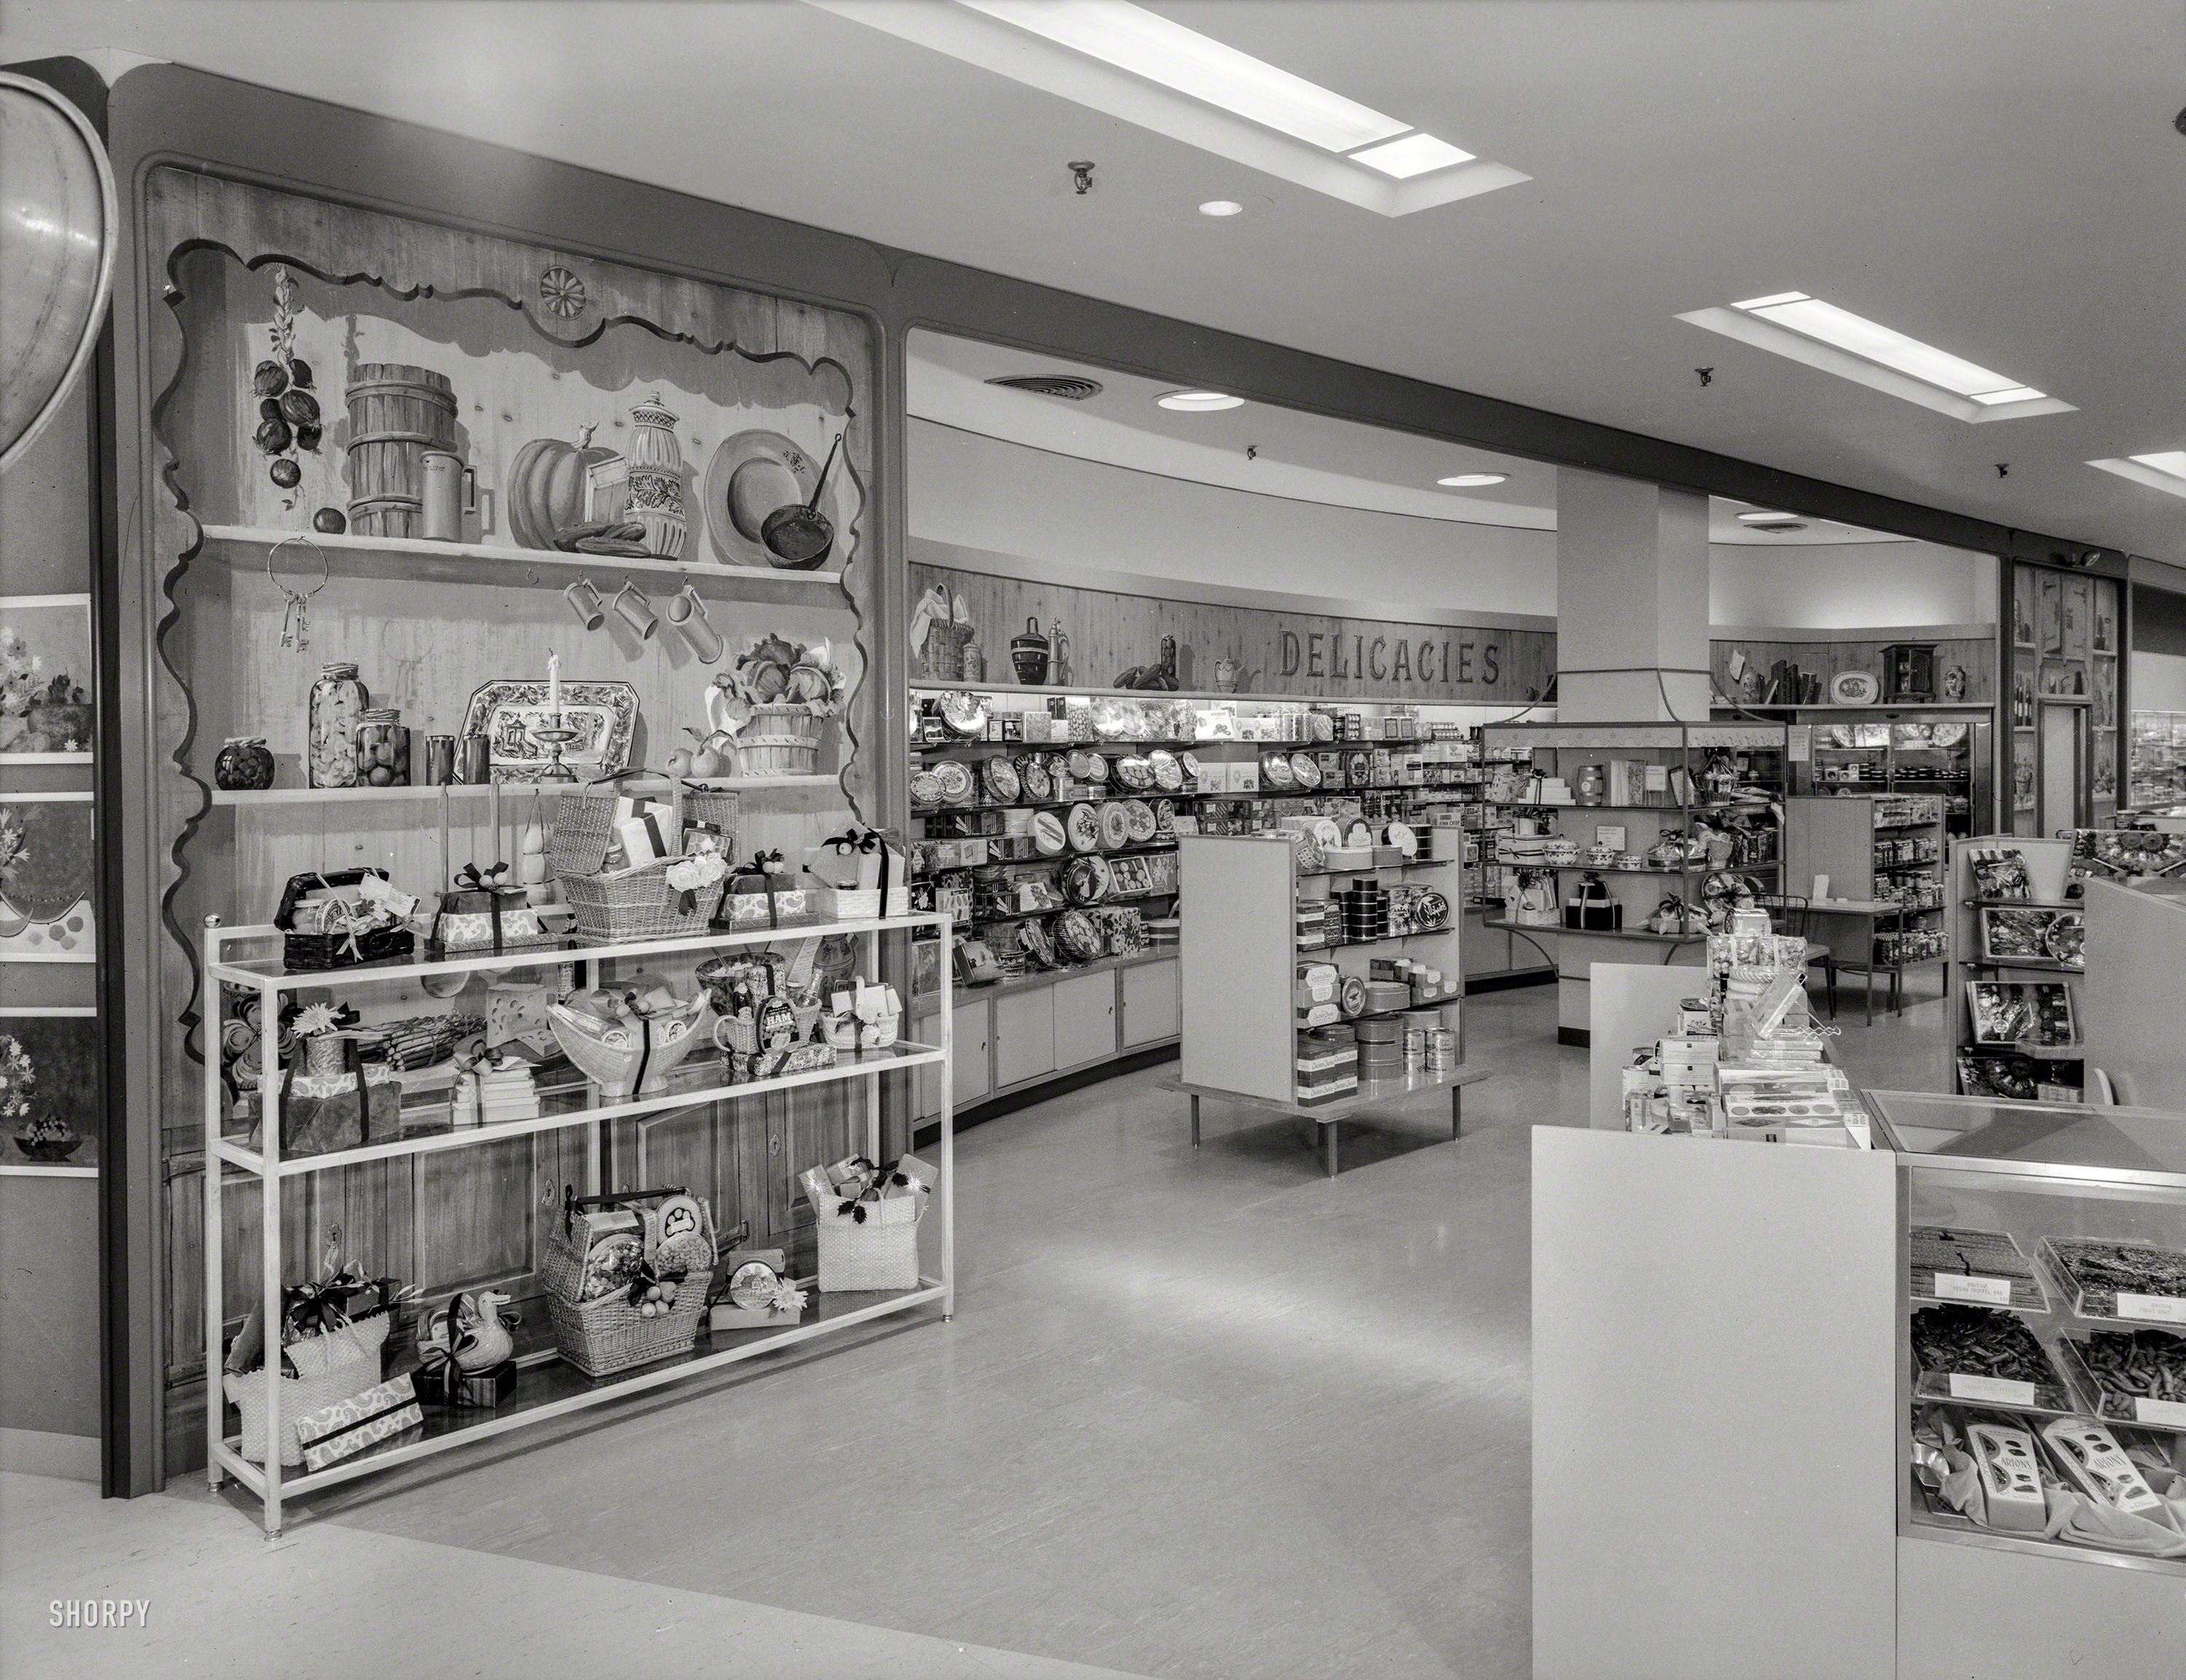 Oct. 23, 1959. Hackensack, New Jersey. "Bloomingdale's Bergen County. 'Delicacies.' Raymond Loewy Associates, client." Sweets for the upscale suburbanite. Large-format negative by Gottscho-Schleisner. View full size.